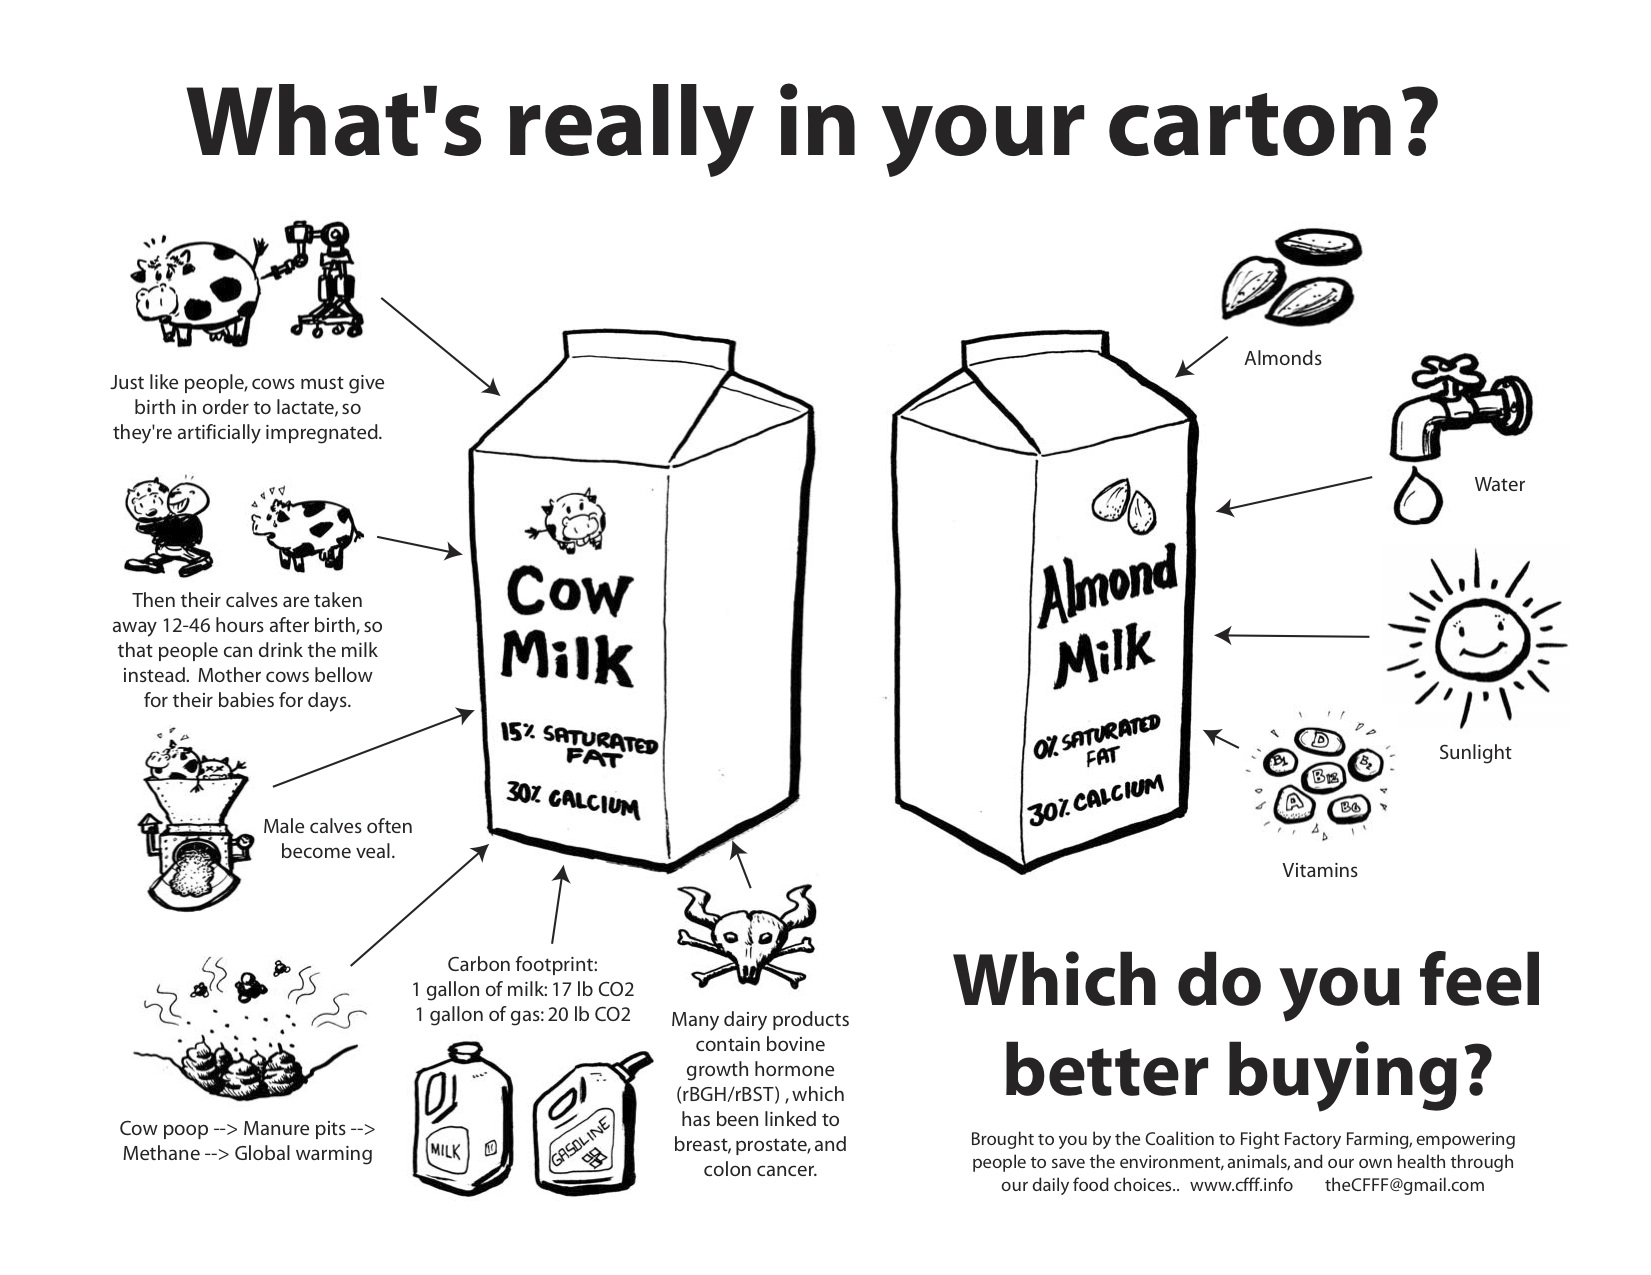 whats-really-in-your-carton1